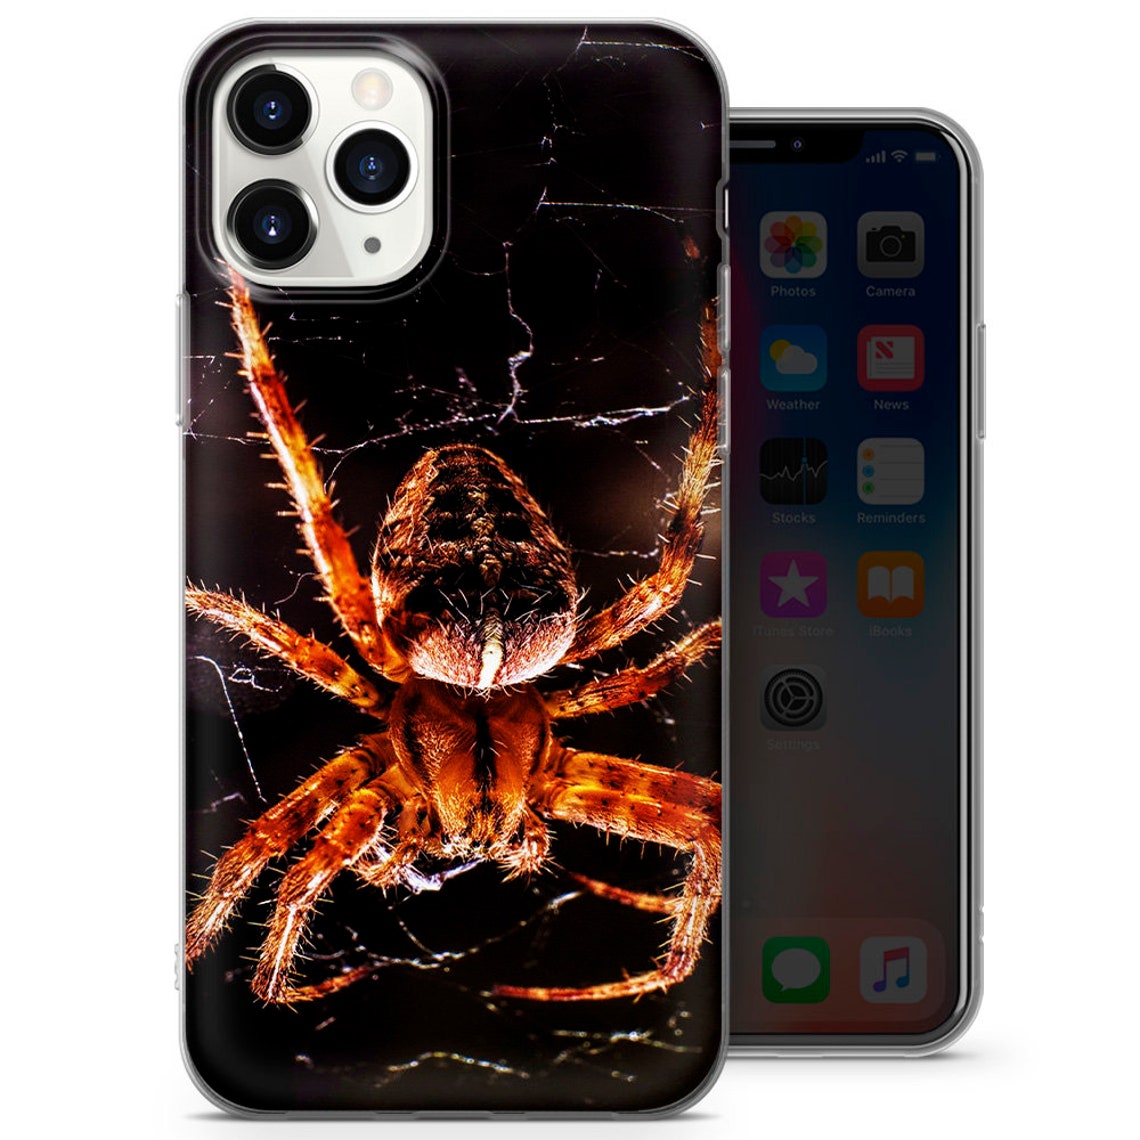 Spider Phone Case Cover for iPhone 5, 6s, 7, 8, SE2020, XR, 11pro Max ...